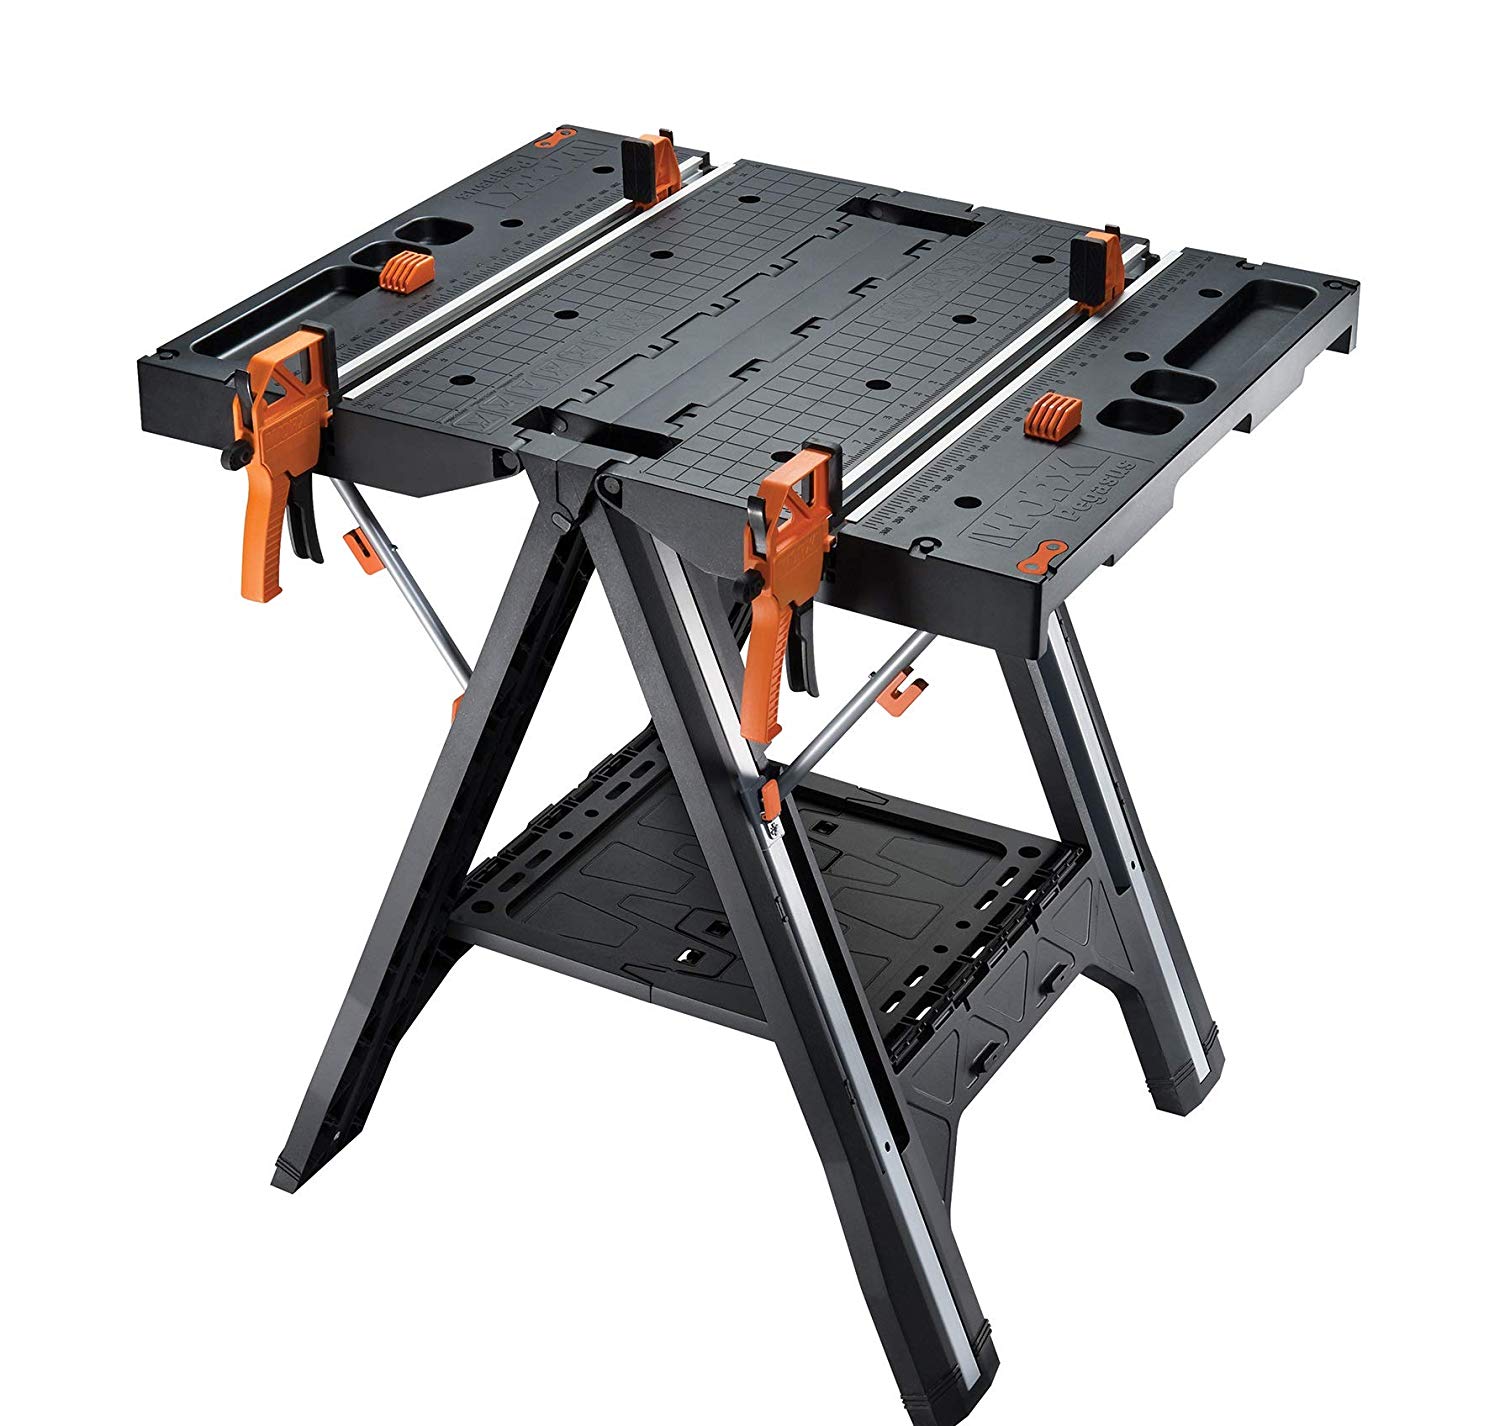 WORX Pegasus Multi-Function Work Table and Sawhorse with Quick Clamps and Holding Pegs – WX051 1